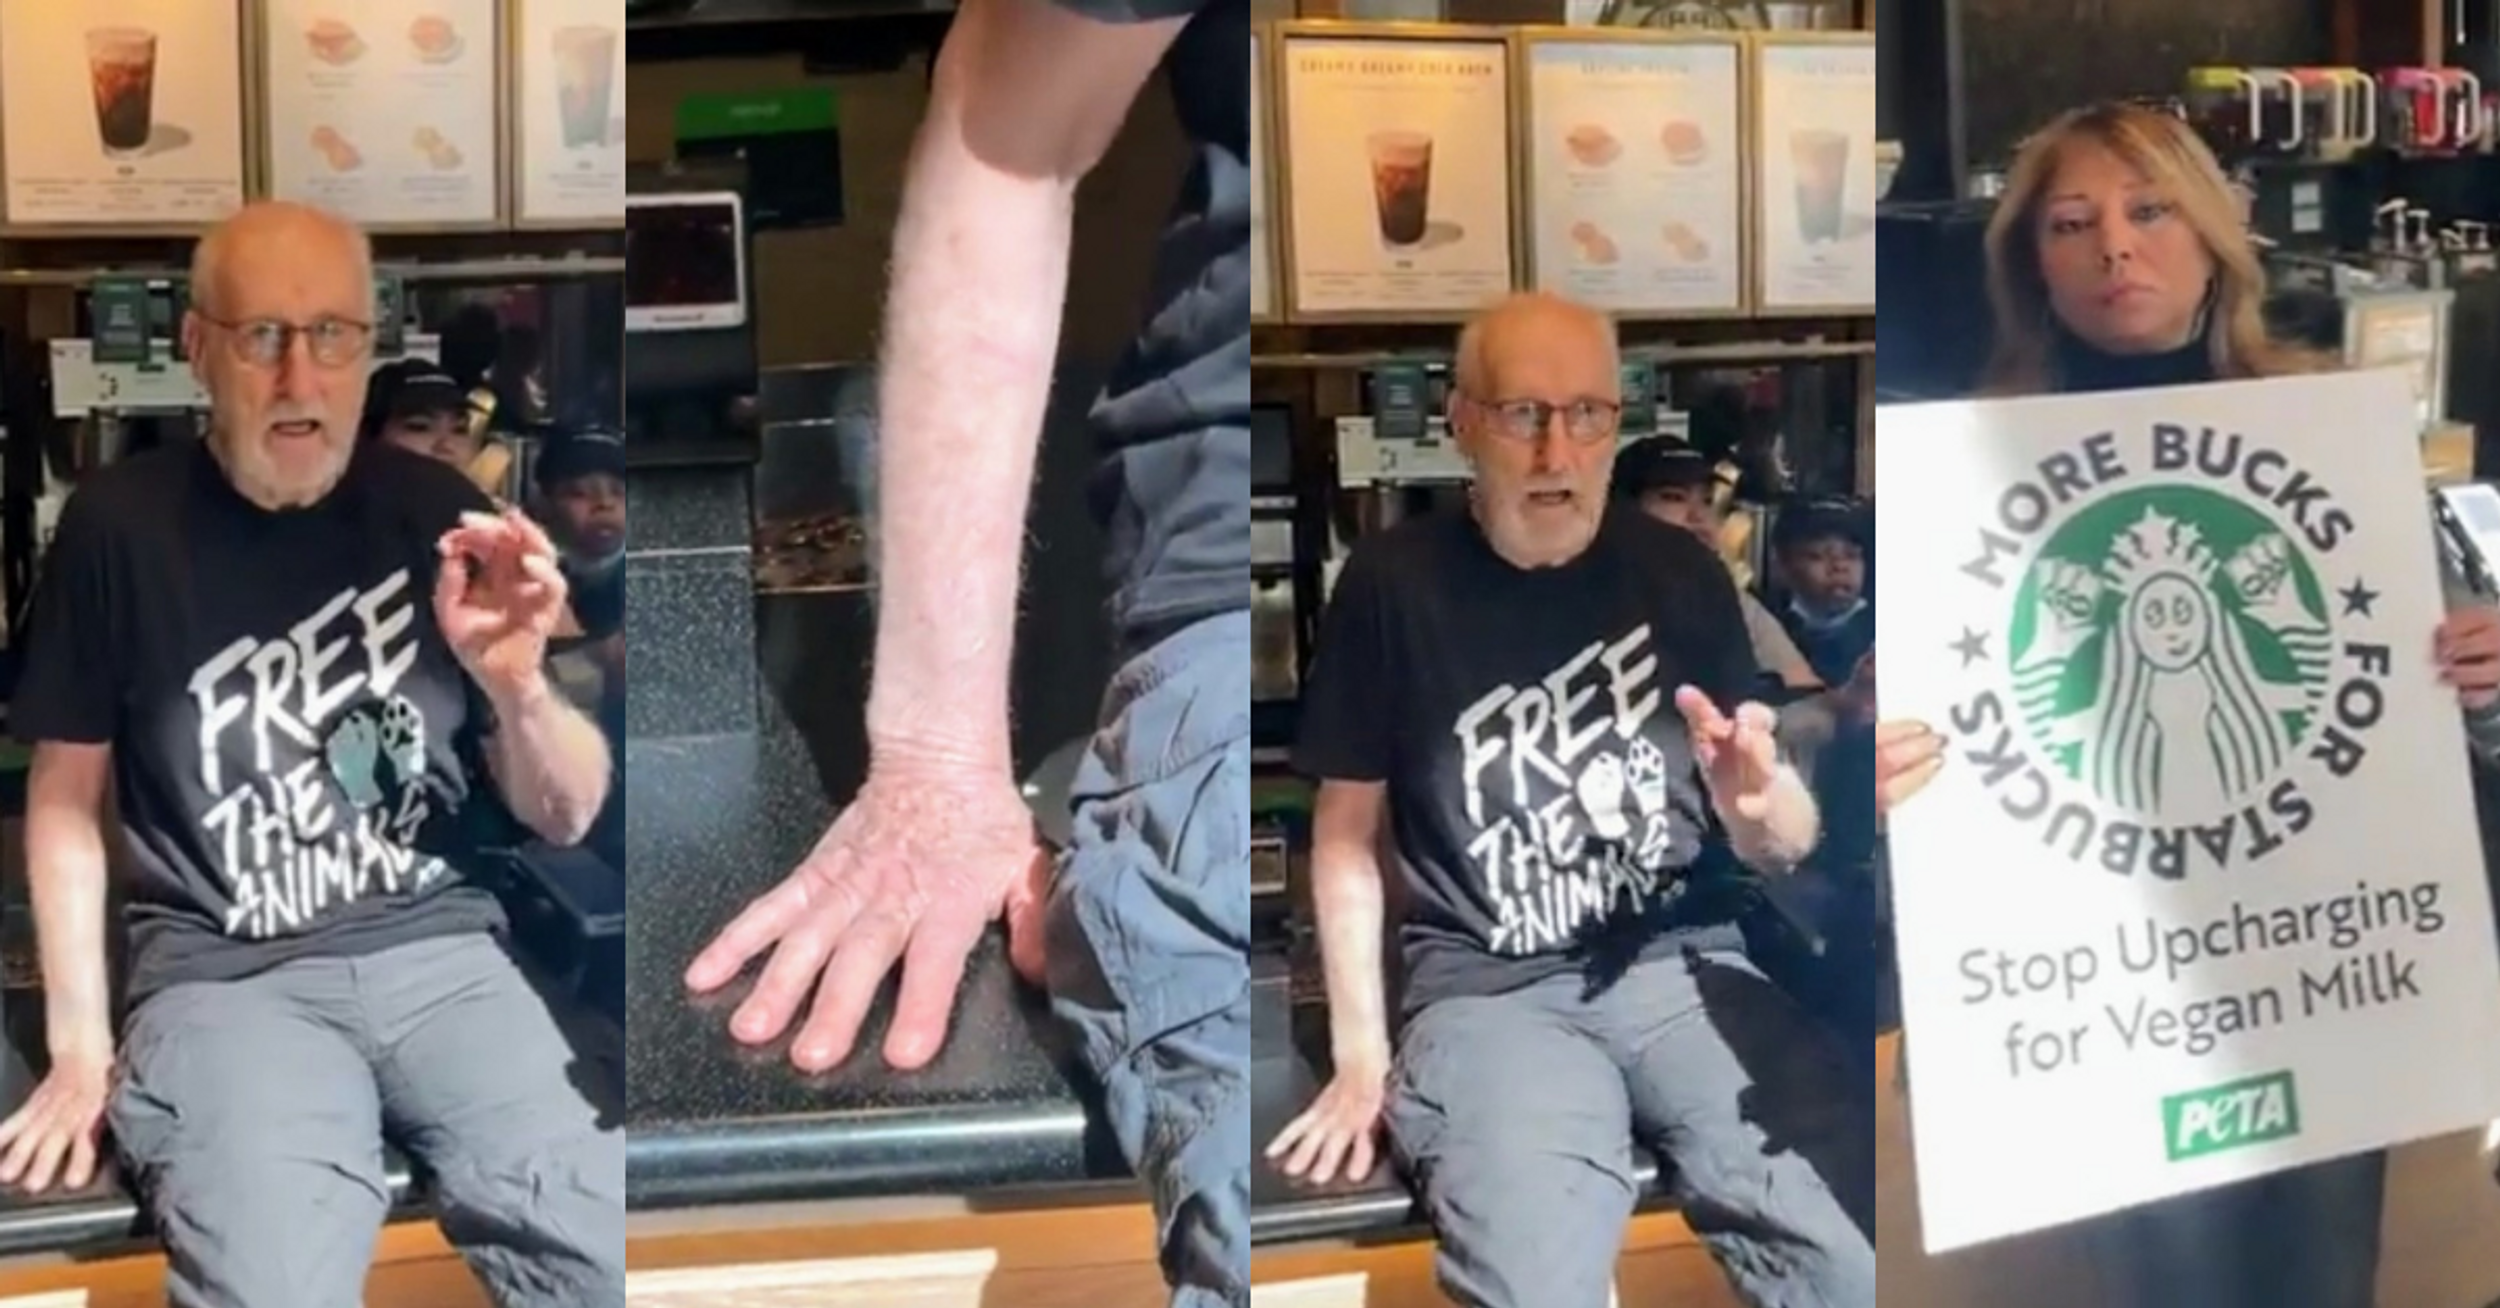 James Cromwell Glues Hand To Starbucks Counter To Protest Surcharge For Plant-Based Milk